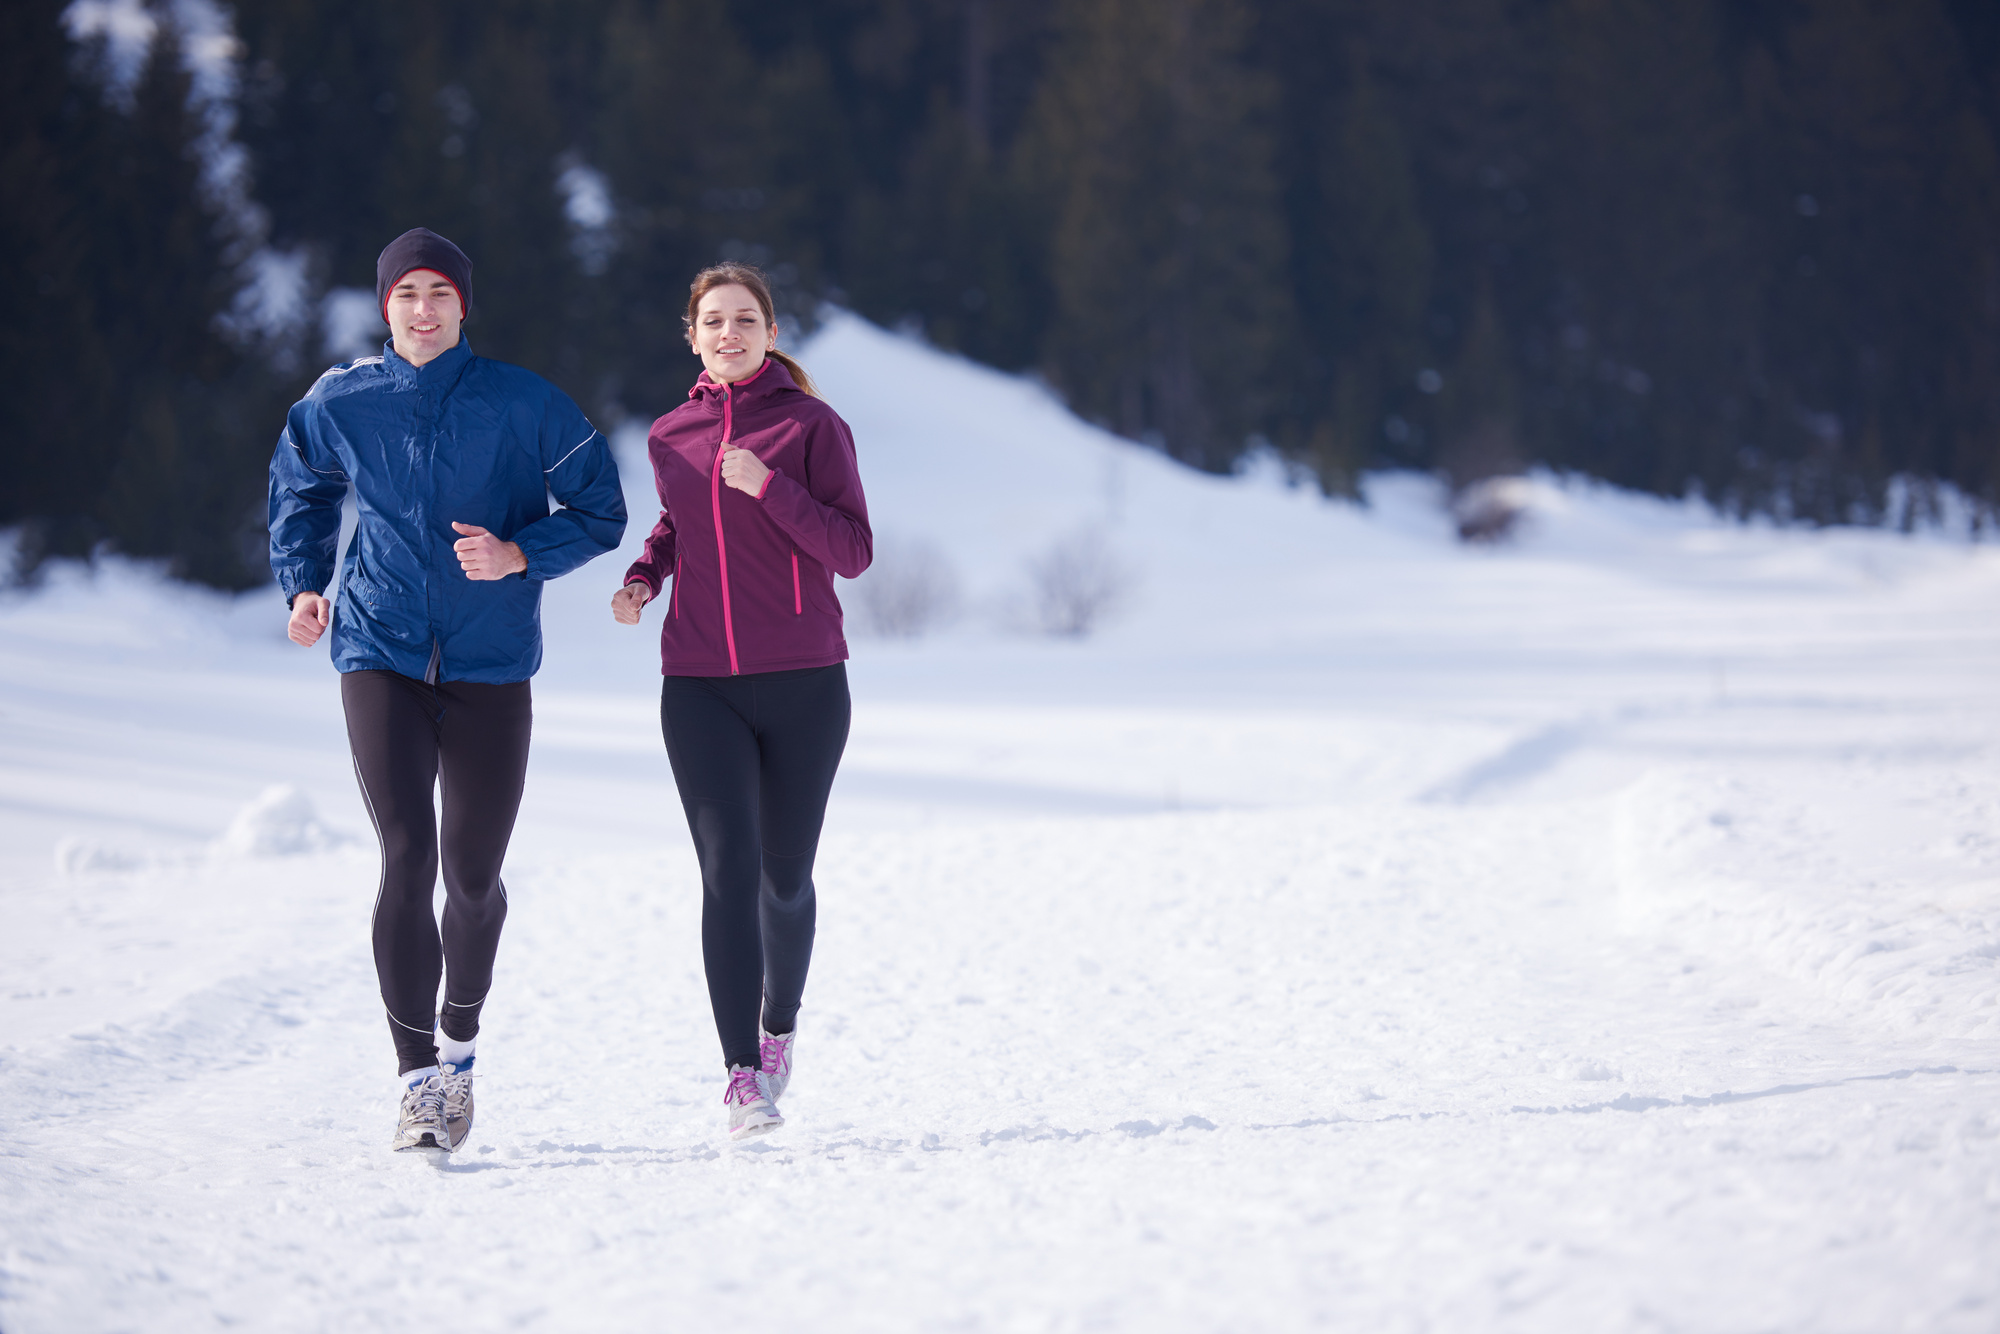 Bundle Up How To Style Winter Workout Clothes To Stay Warm And Fashionable